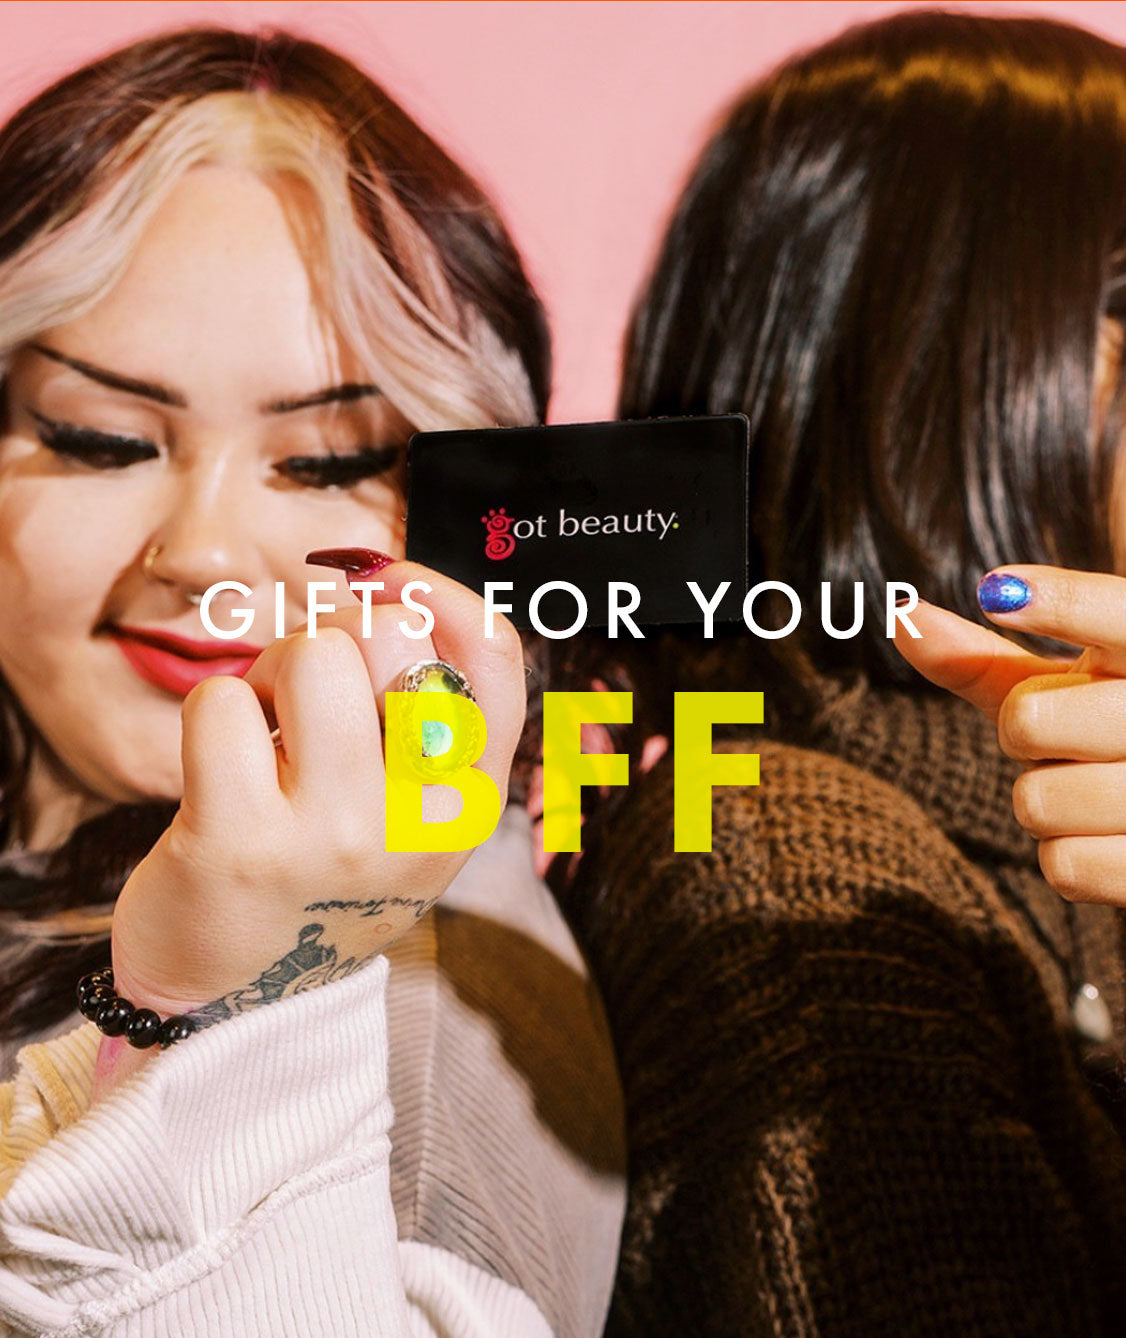 Models with backs together pass a black Got Beauty gift card between them with caption, "Gifts for your BFF" overtop in white and yellow lettering